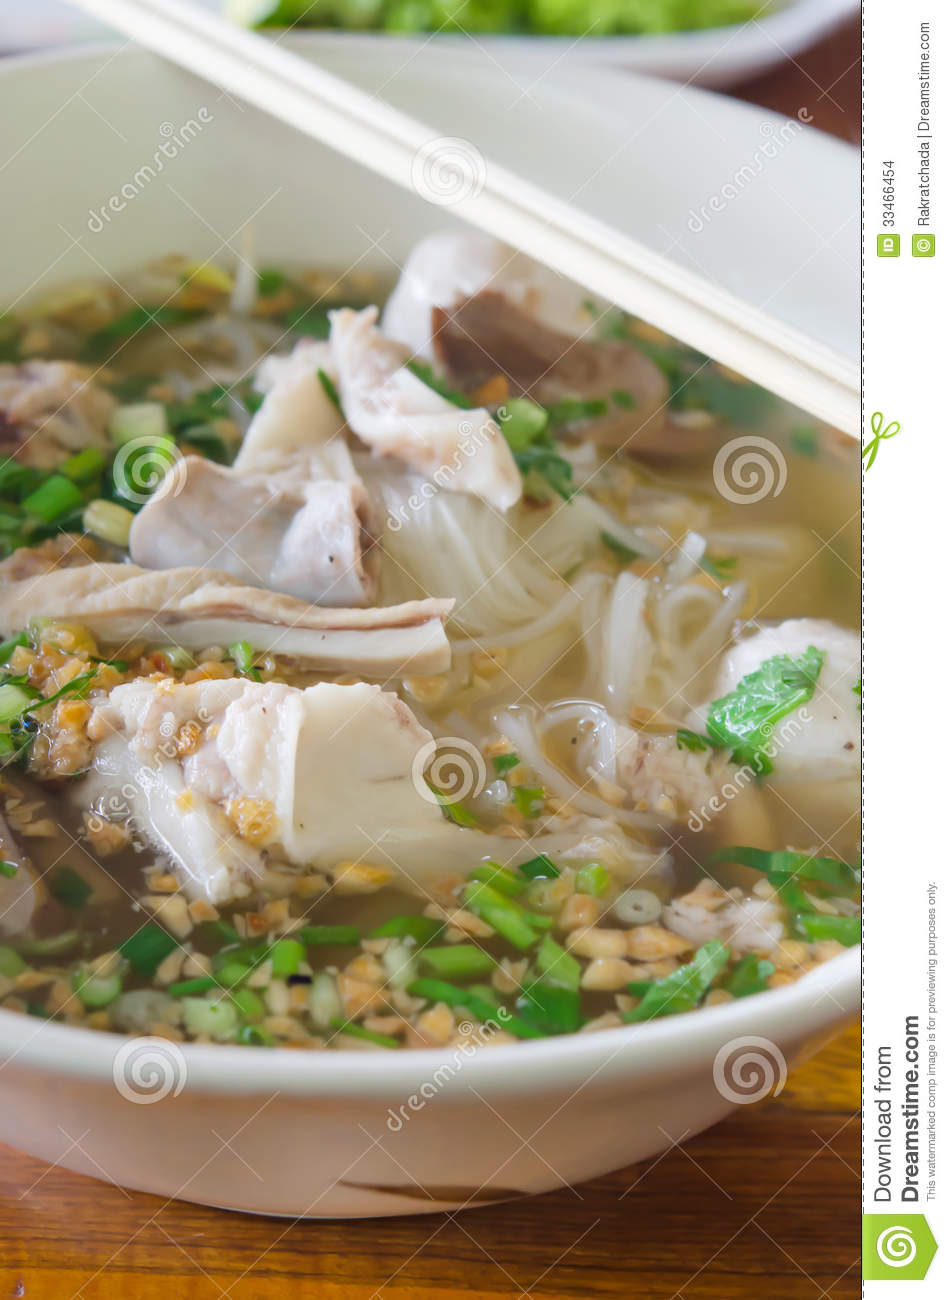 Pho Bo  Vietnamese Food  Rice Noodle Soup With Meat And Vegetable In